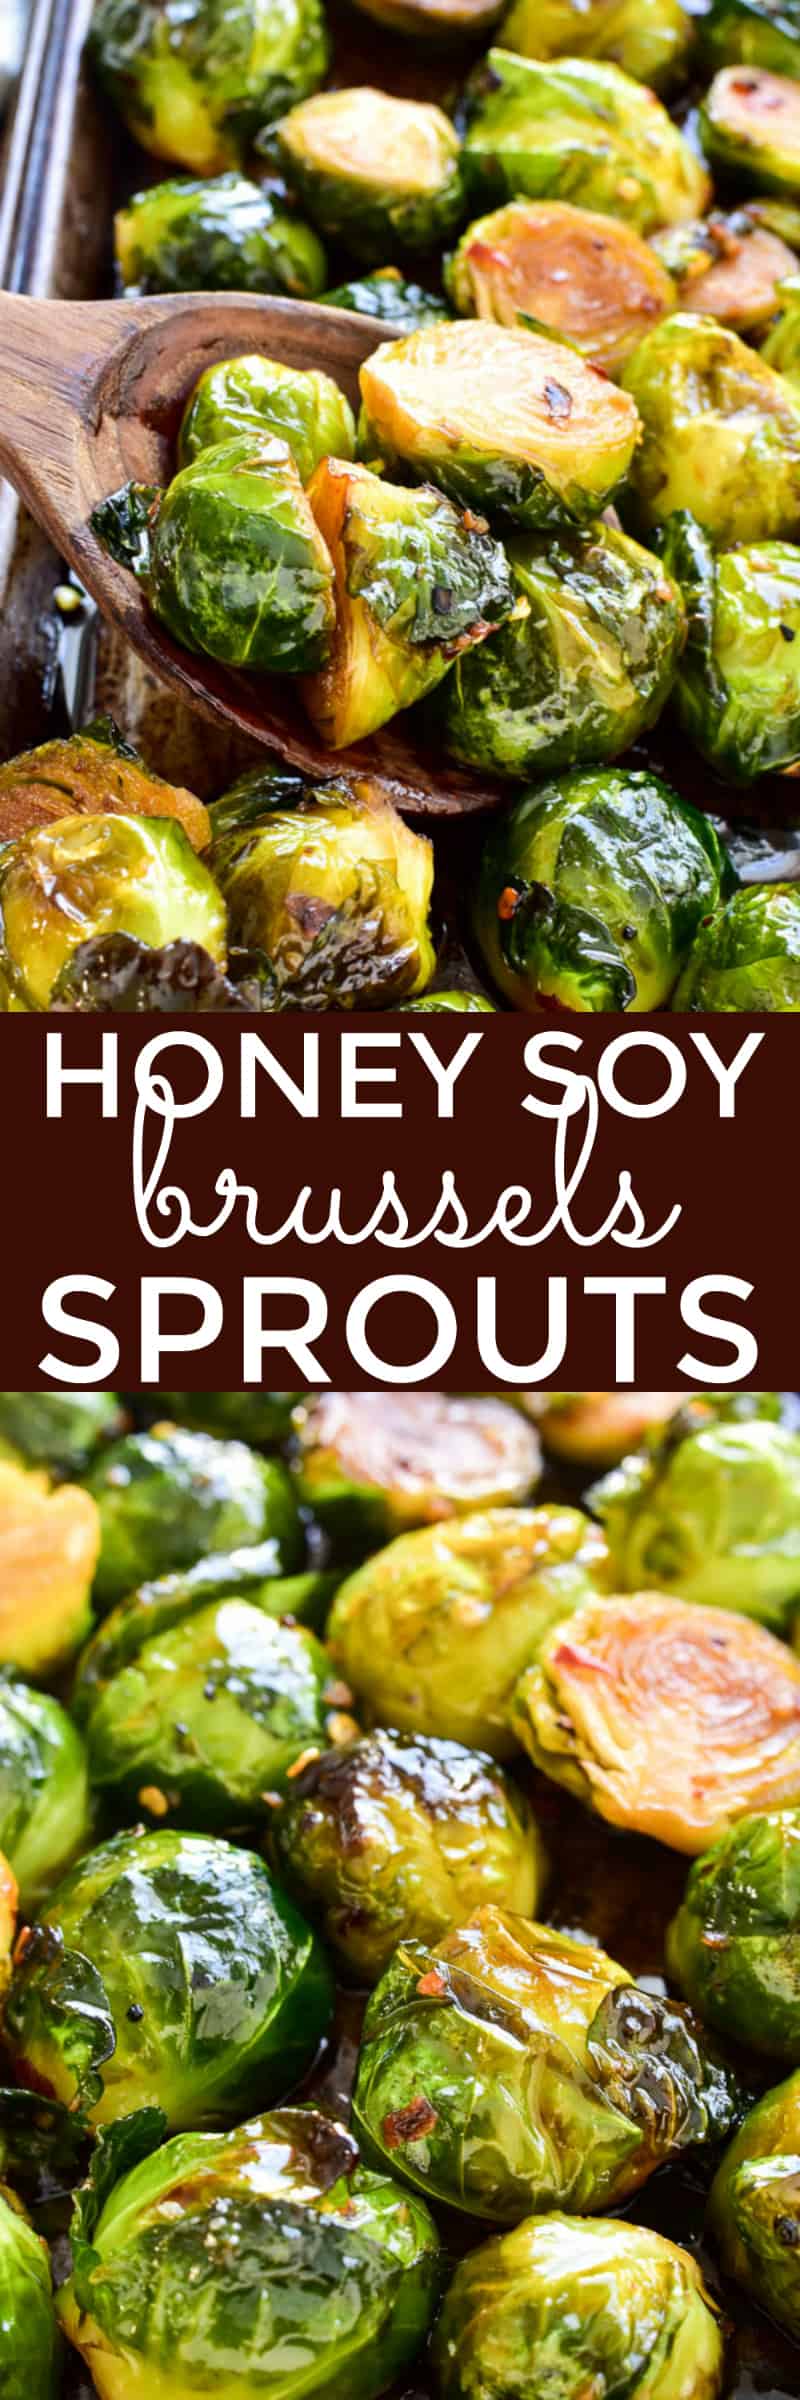 Collage image of Honey Soy Roasted Brussels Sprouts